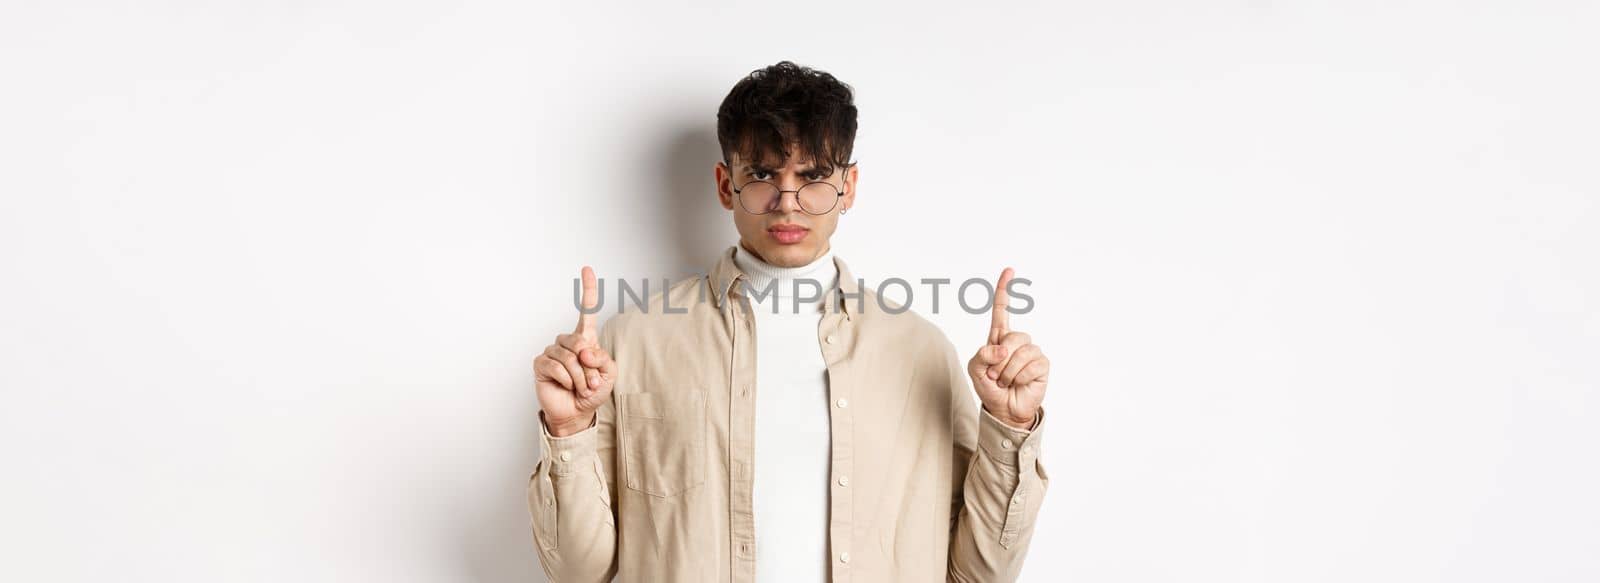 Angry and displeased young man in glasses frowning, looking disappointed and pointing fingers up, standing on white background.